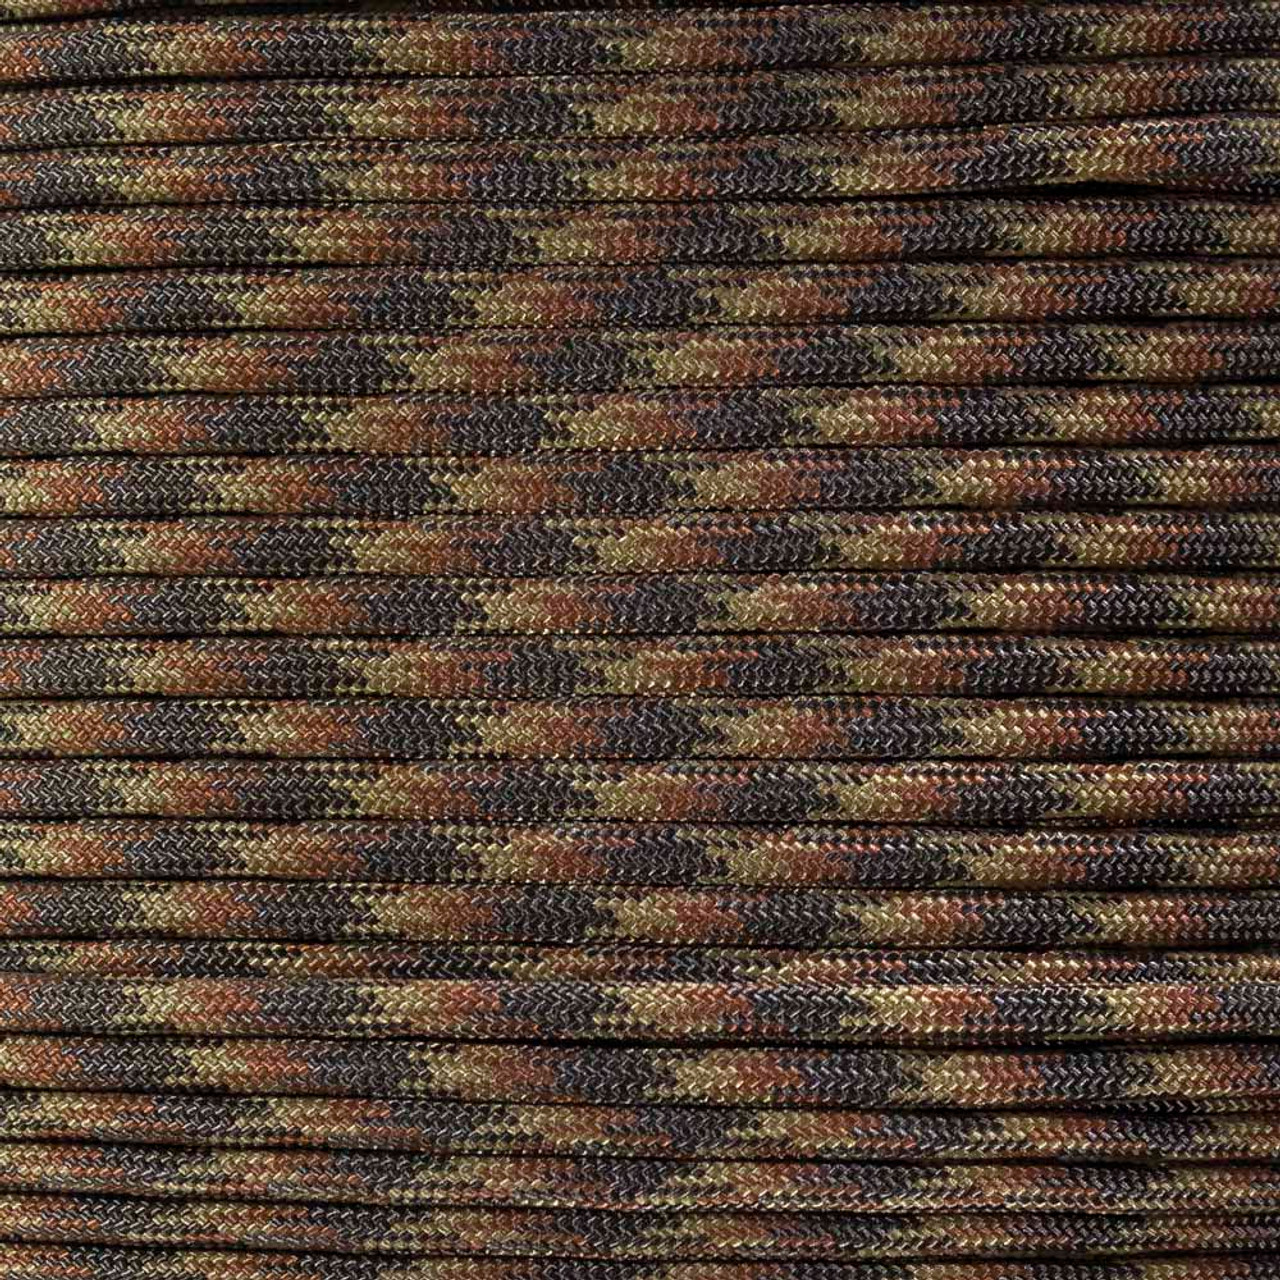 Paracord Planet Blend Pattern Type III 550 Paracord Available in 10, 25, 50, 100, 250, and 1000 ft, Size: 25 Feet, Brown